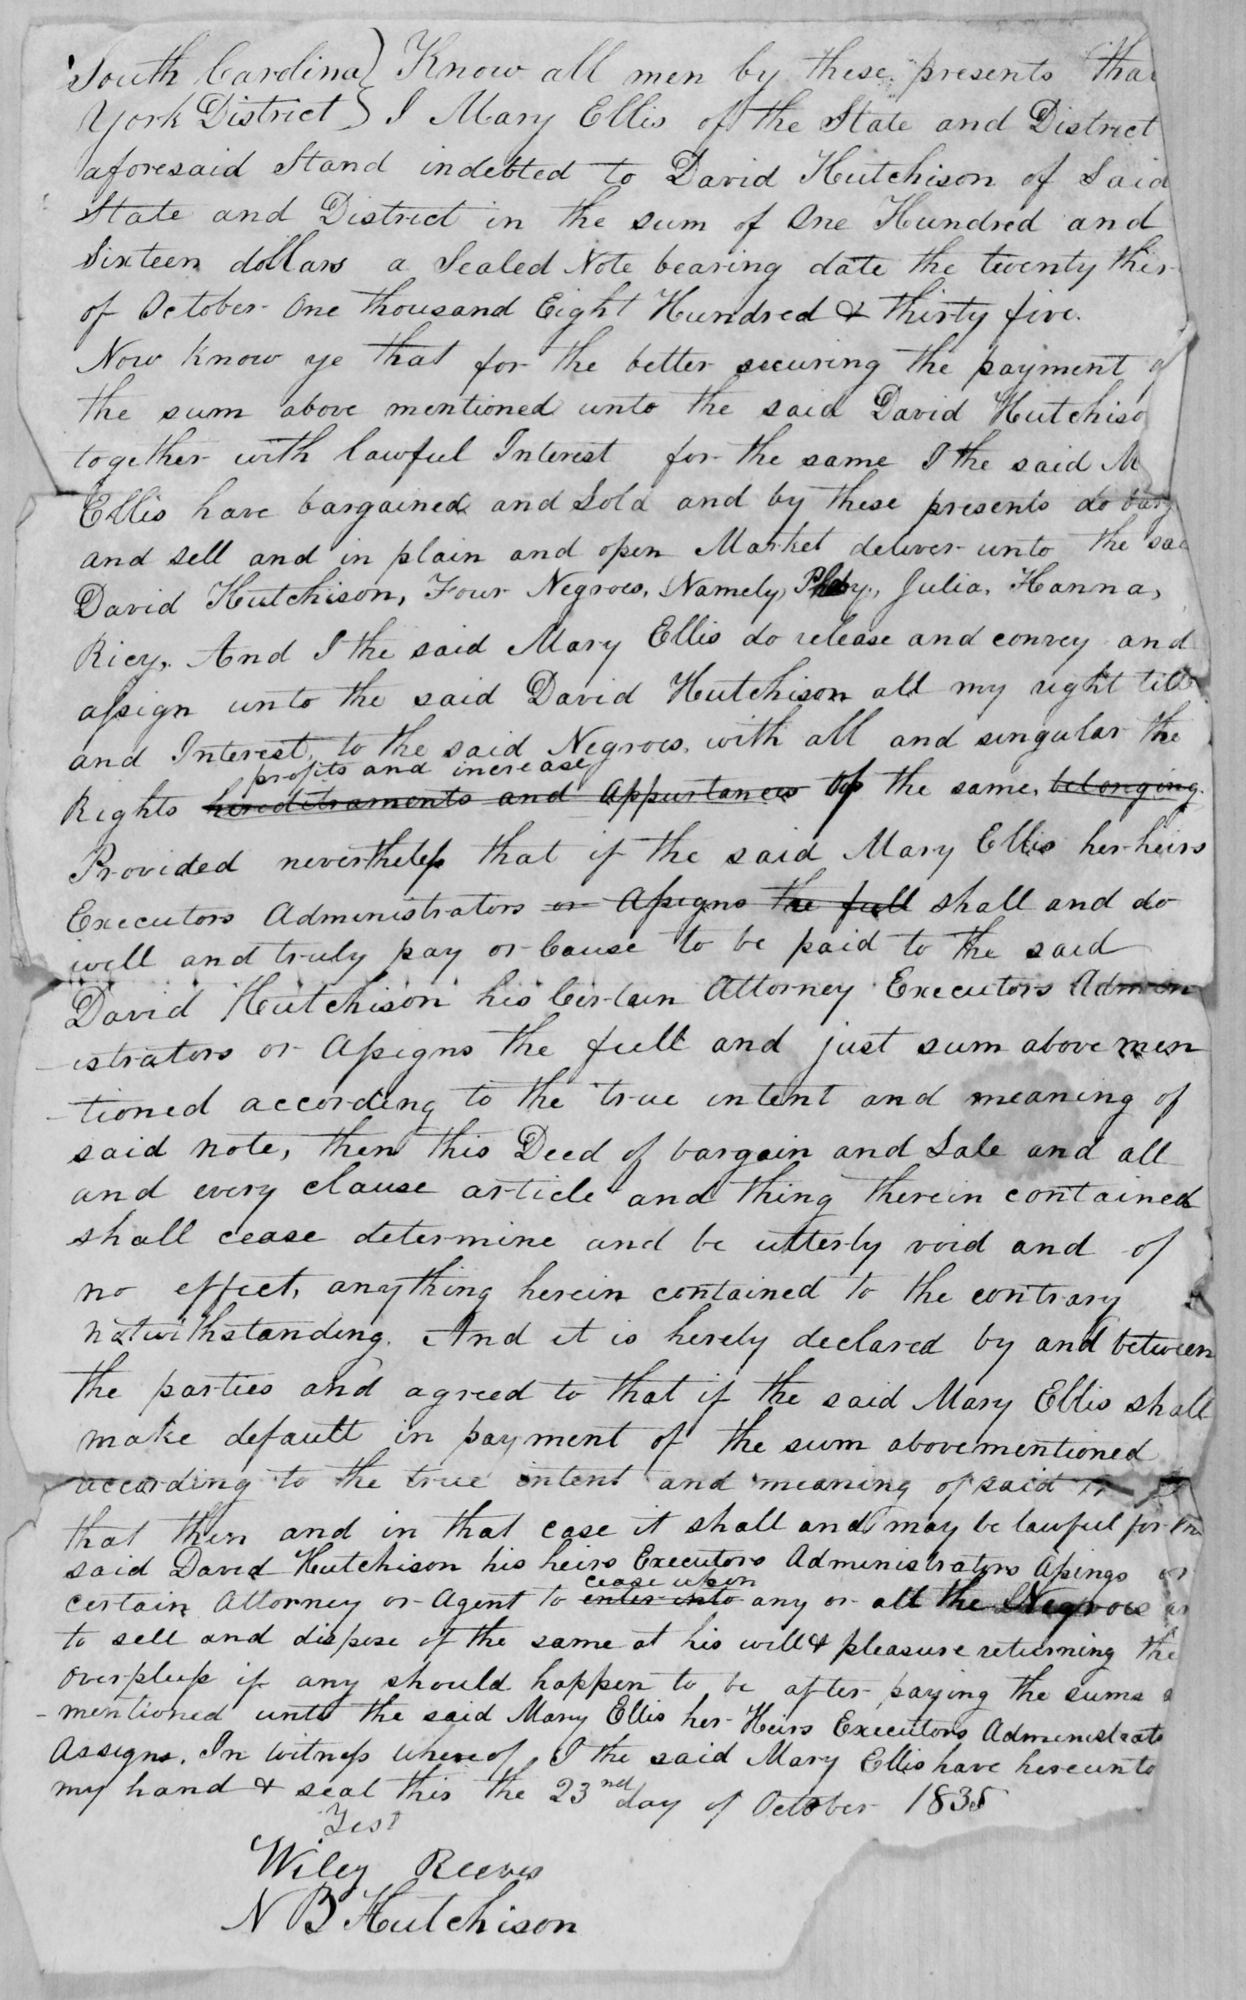 Document Note: Two certificates from the South Carolina College for N. B. Hutchison.  The first is dated April 1, 1836 and is for board and tuition, signed by Thomas Park, College Treasurer.  The second is dated April 1, 1838 and is for $52 for Board for 13 weeks and $25 for tuition, also signed by Parks.